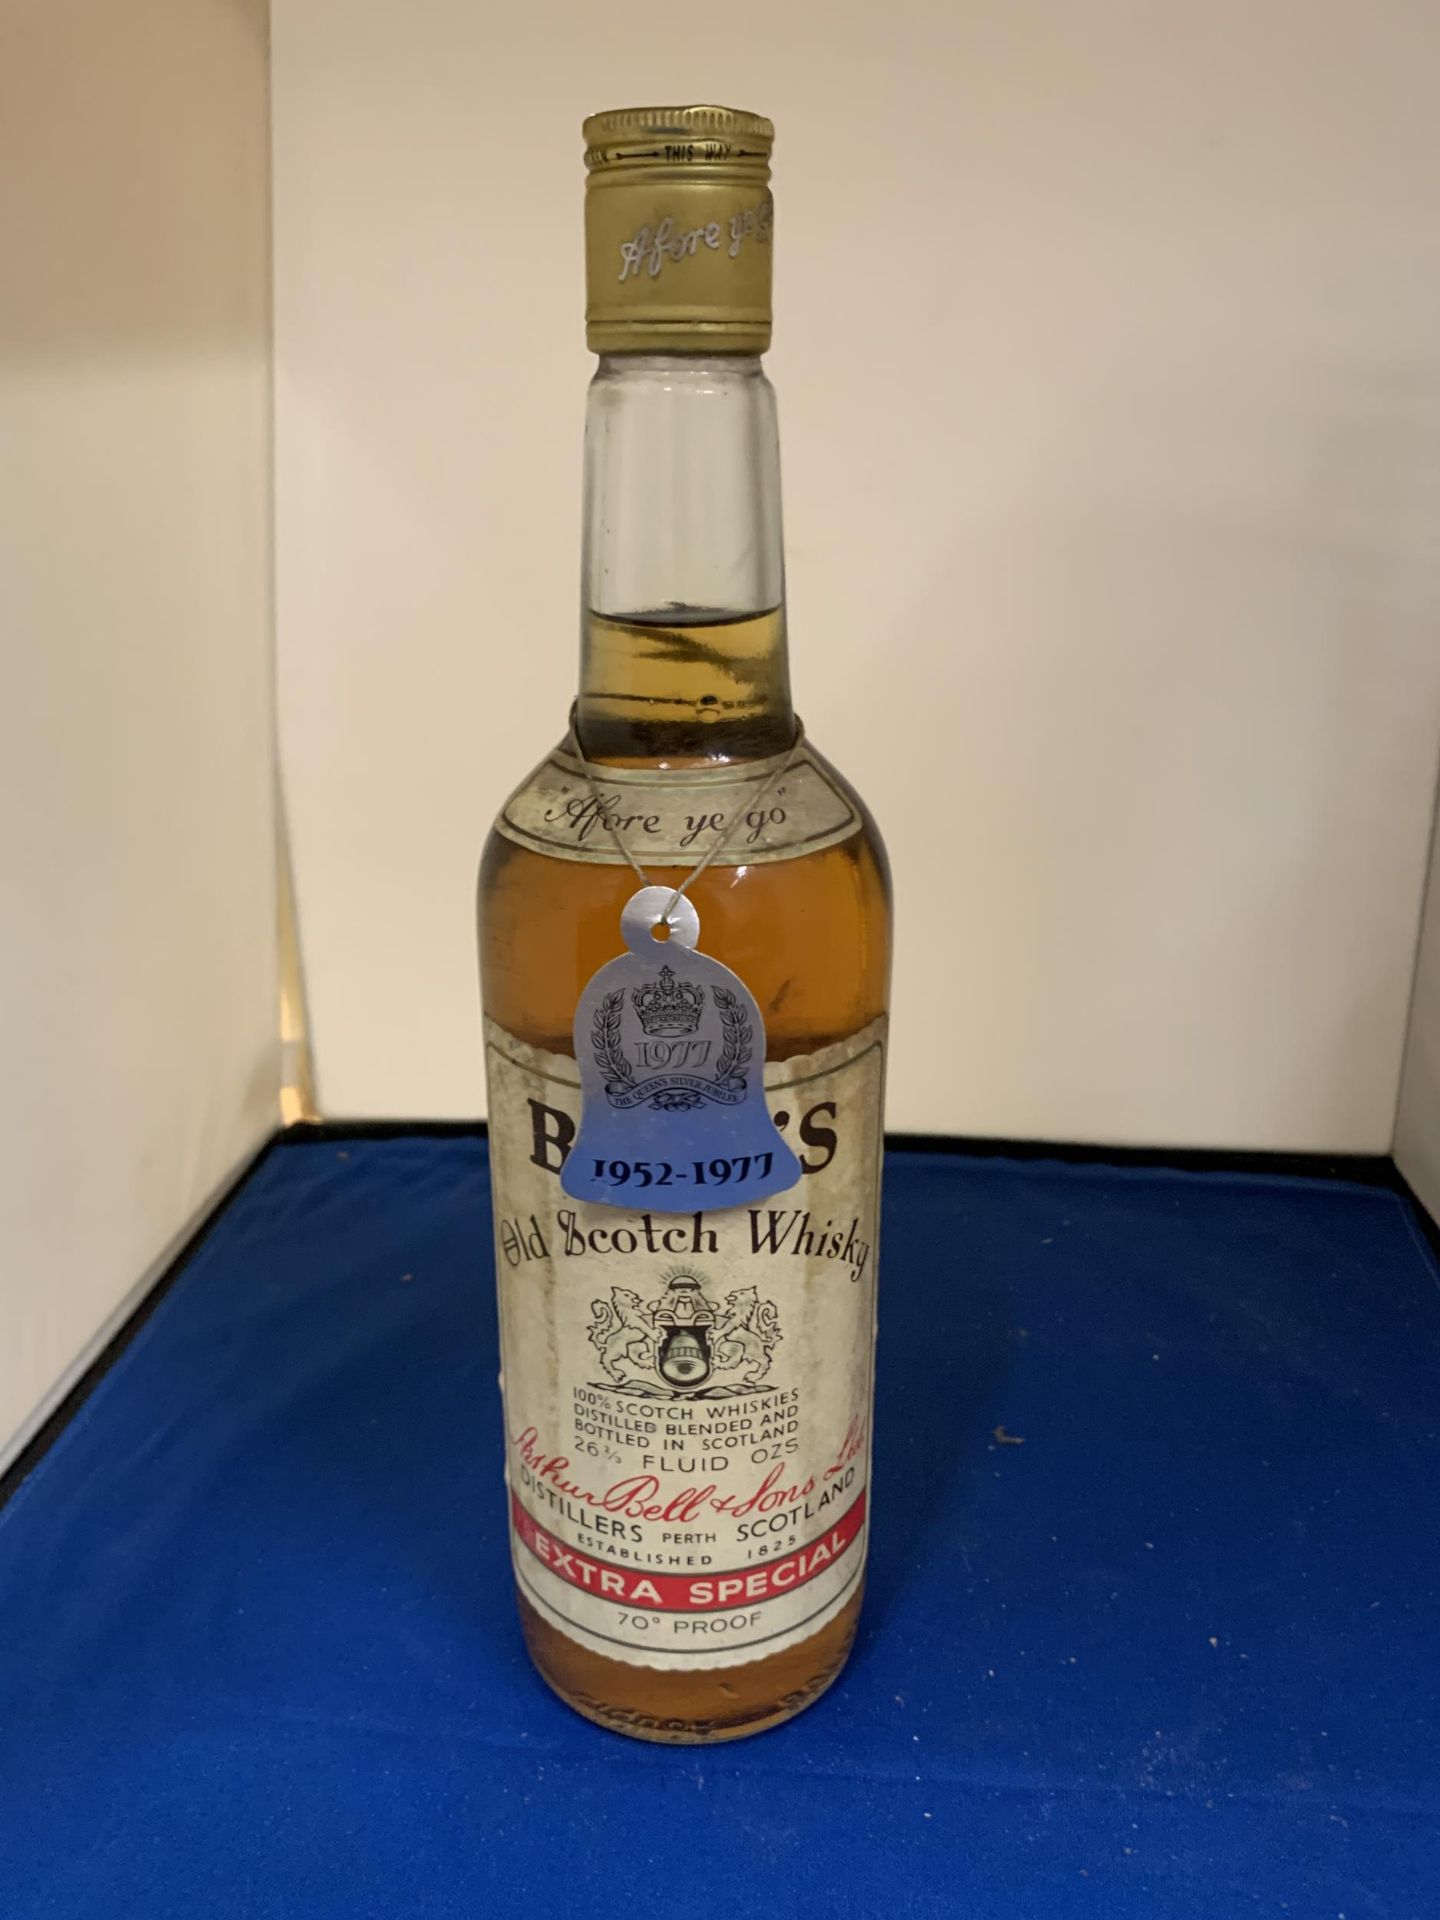 A BOTTLE OF BELLS EXTRA SPECIAL 70% SCOTCH WHISKY